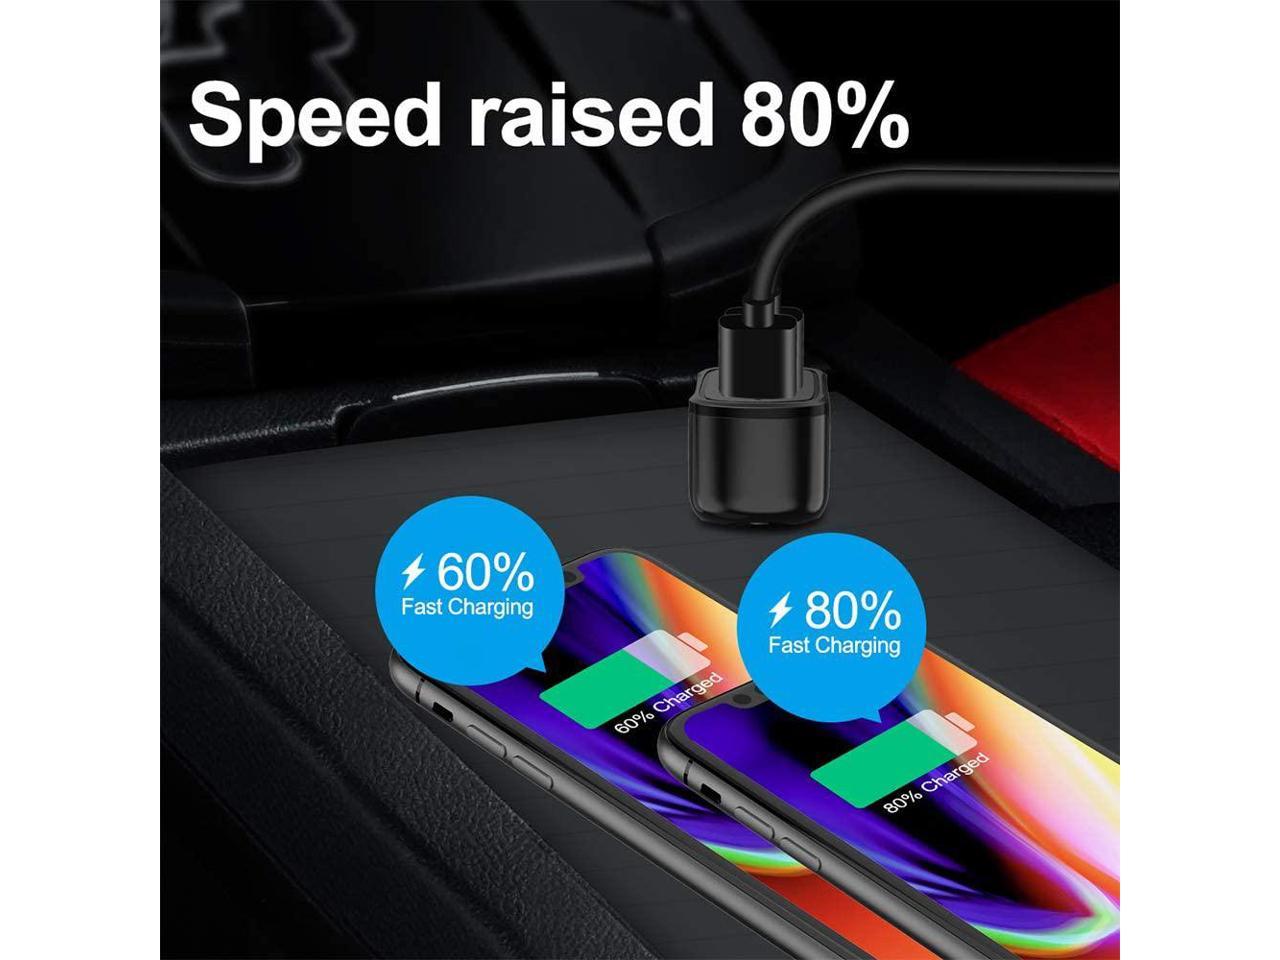 PD 20W & Dual USB-A 24W/4.8A Max /12 mini/11/11 Pro USB C Car Charger,Bralon 44W Max /XS/XR/X/8/7,Galaxy Note S10 S9 S8 S7 & More Fast Car Charger Adapter Compatible with Phone 12/12 Pro 